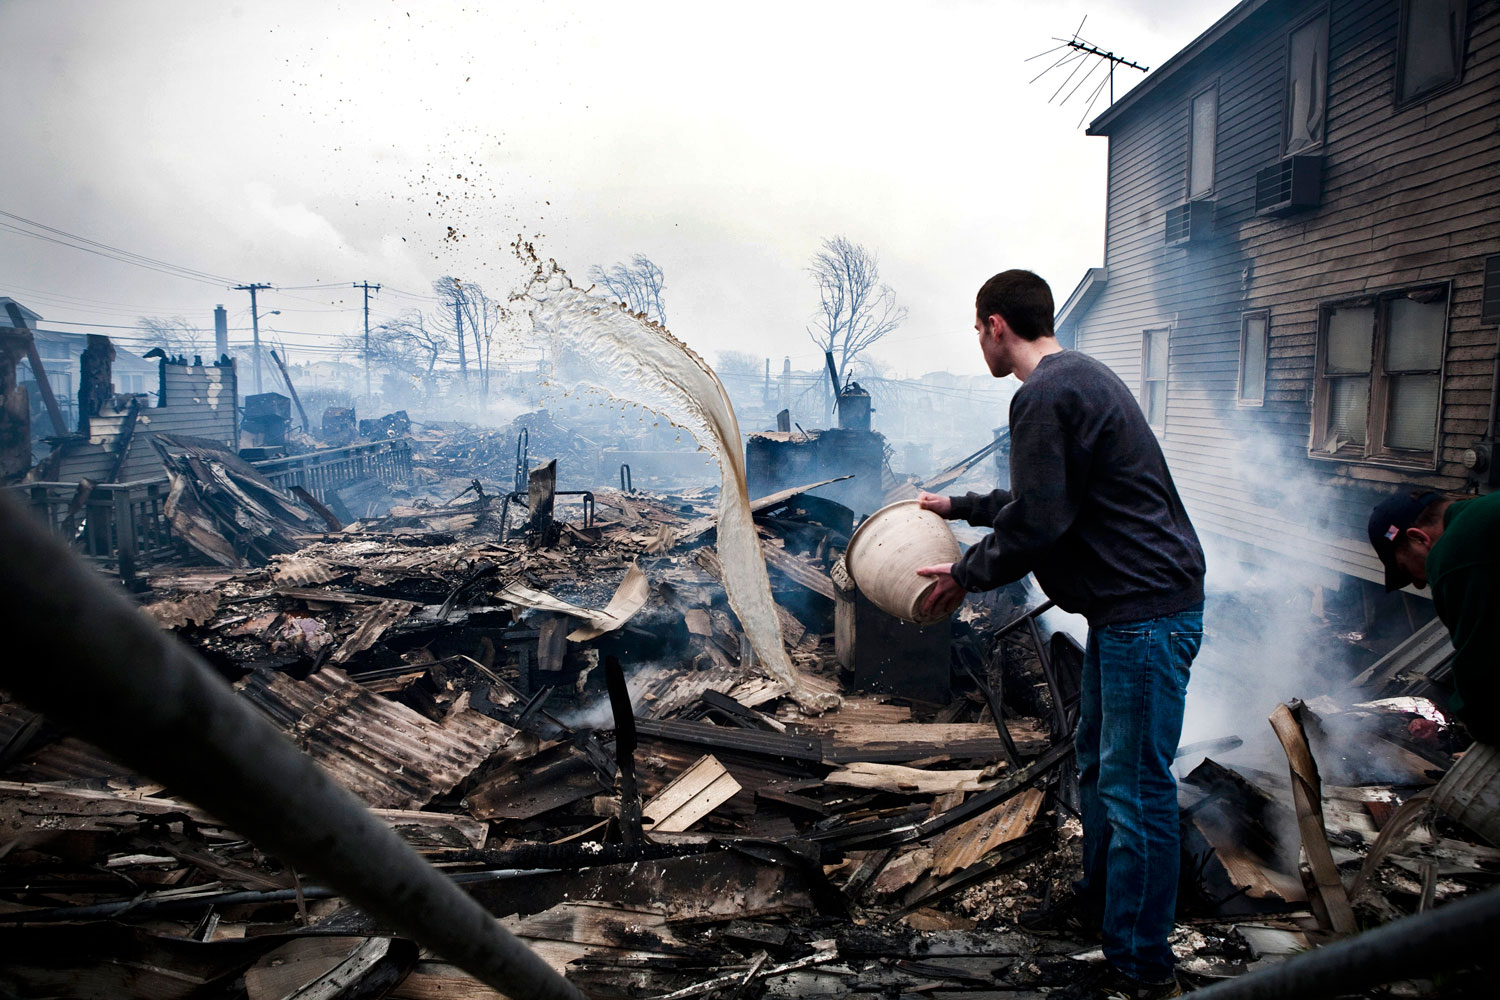 Fire and Water in Breezy Point, Queens, N.Y., Oct. 30, 2012